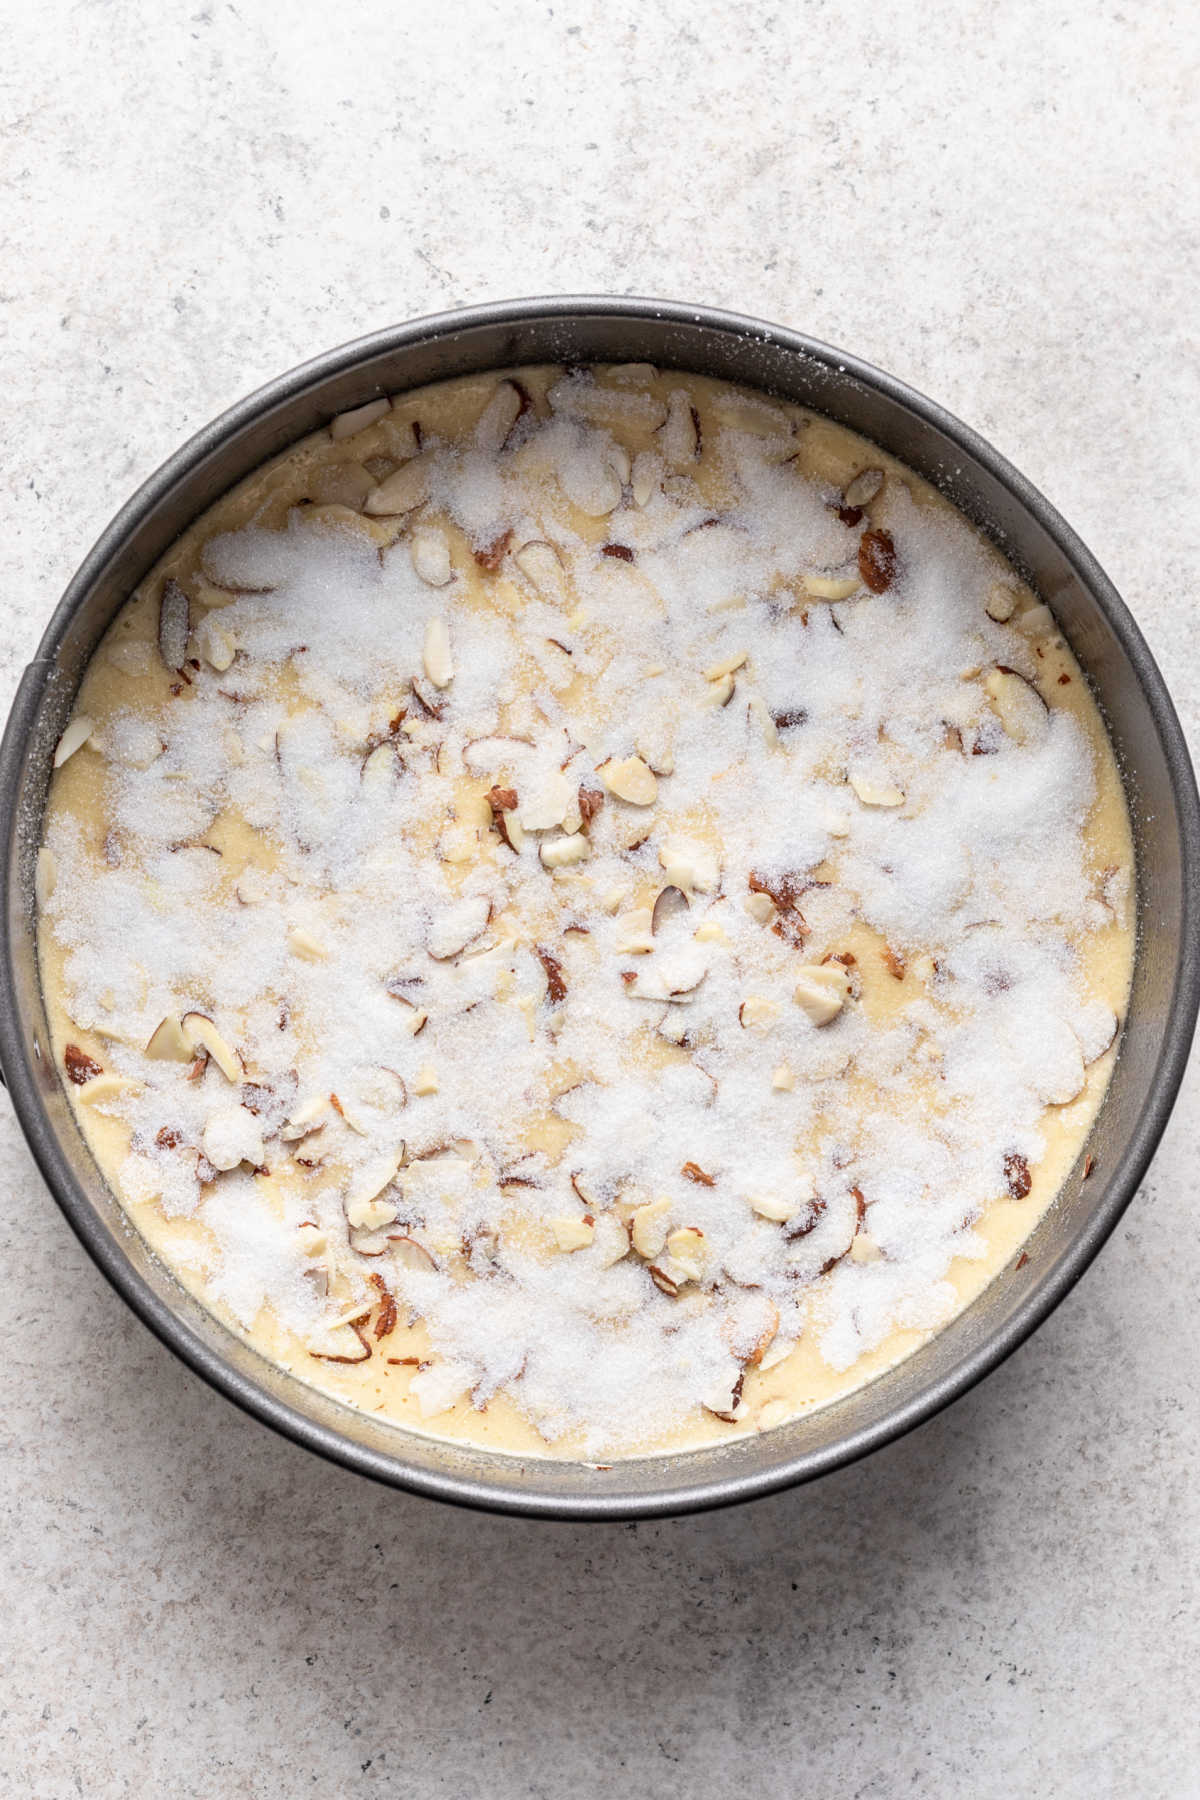 Sugar and almonds on top of olive oil cake batter. 